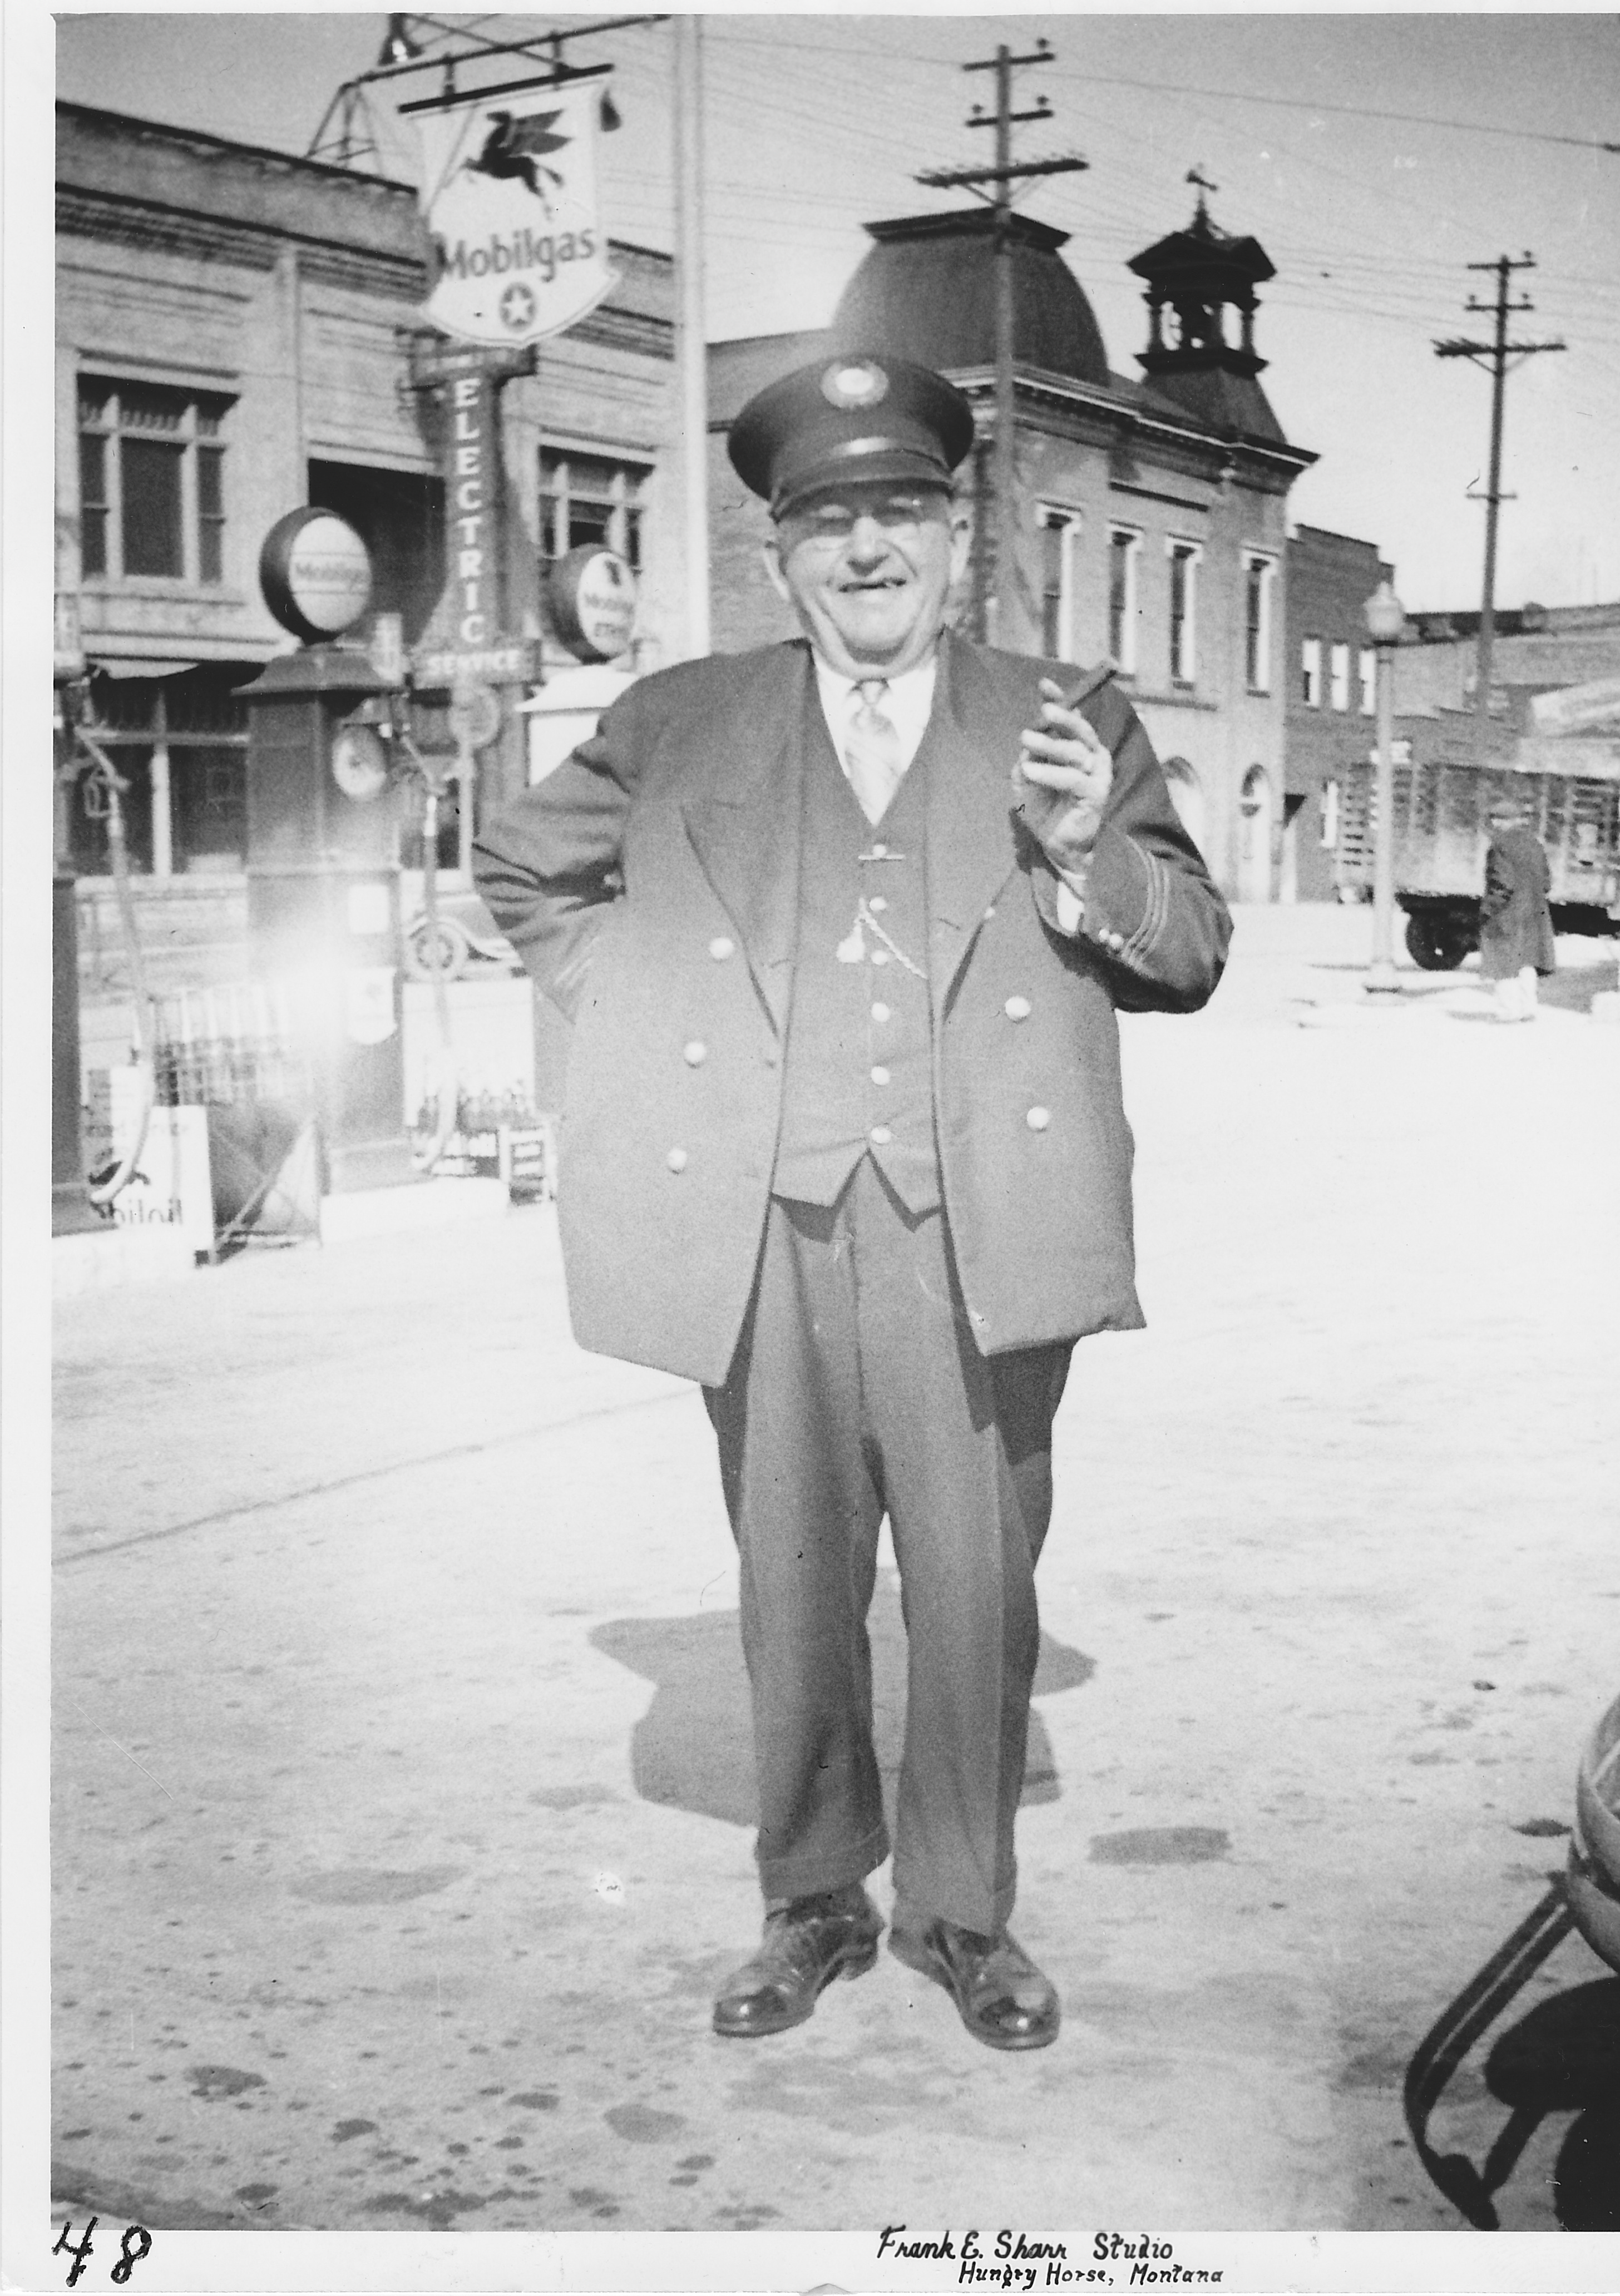 Peter Stetten, Morenci’s friendly policeman in the 1930s. (photo taken in front of Green’s Mobil Oil Station, southwest corner of Baker and W. Main Streets.